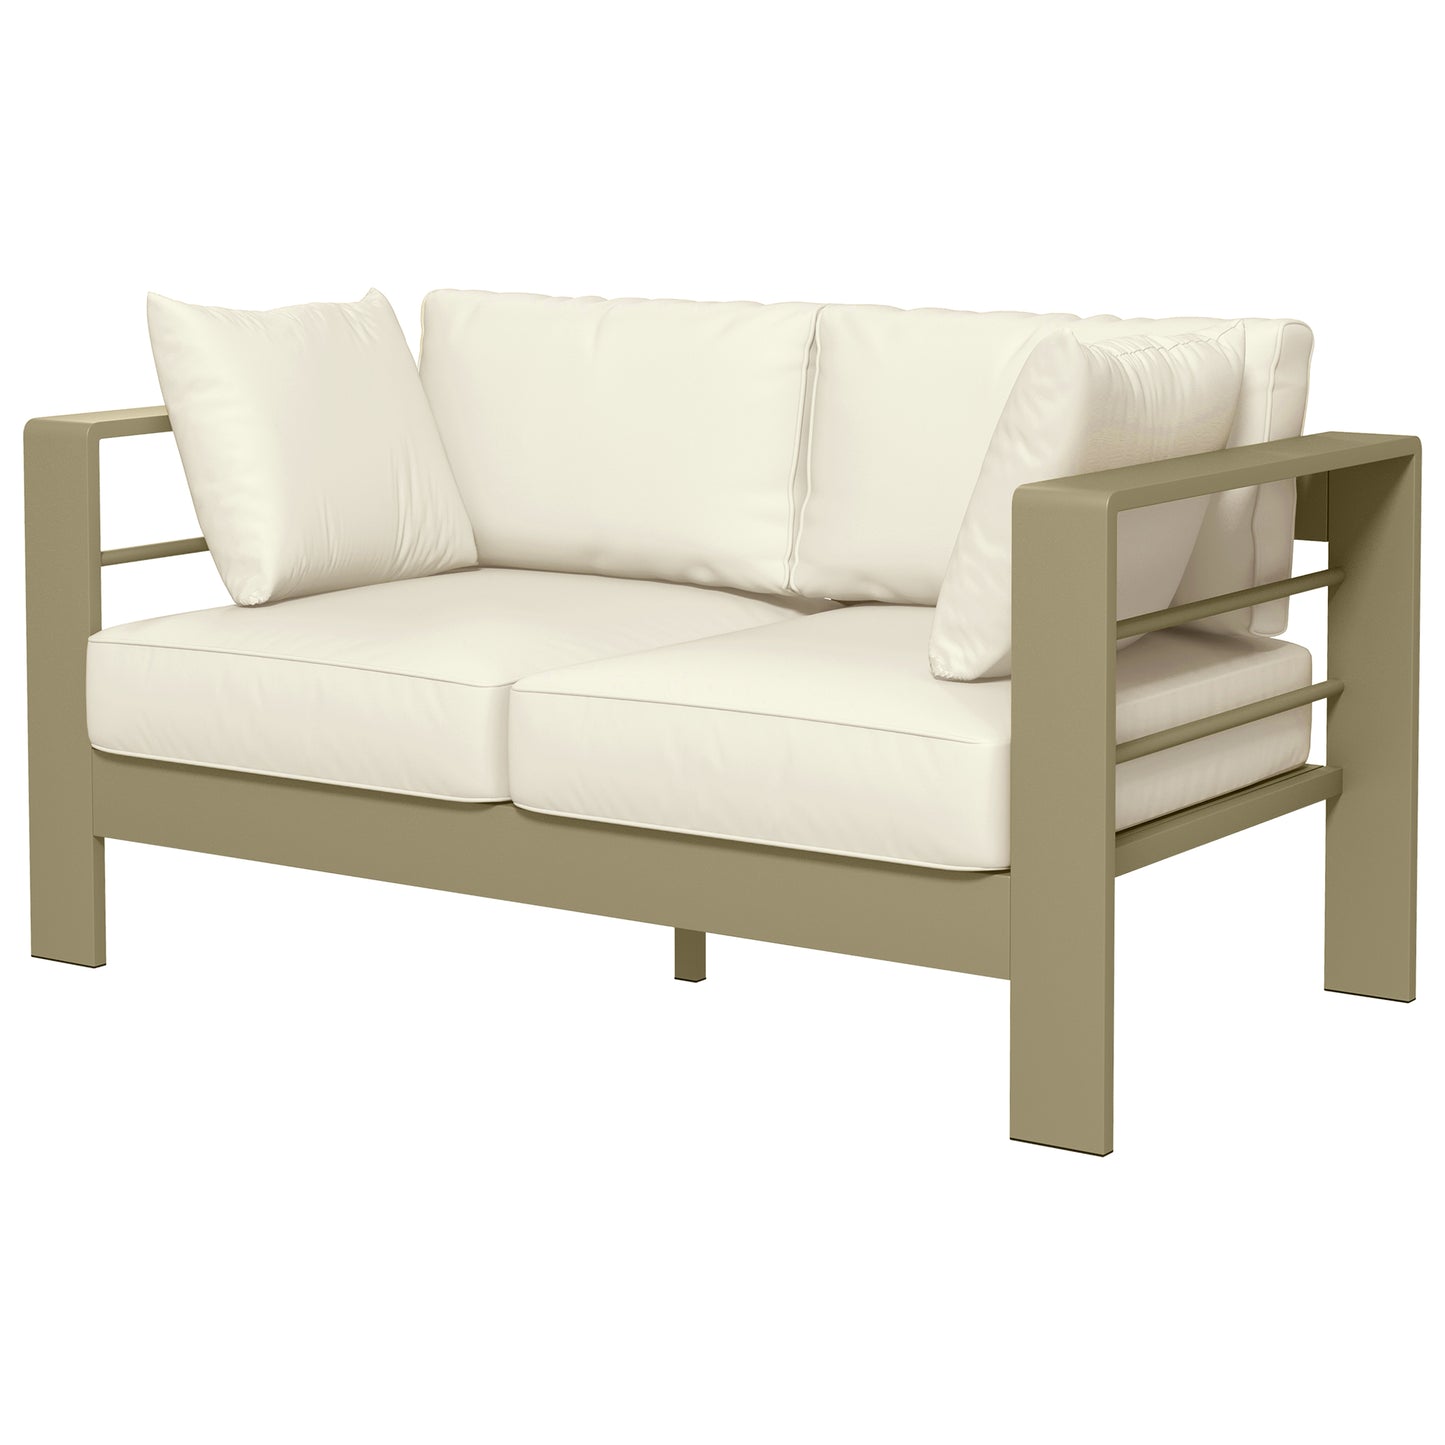 Outsunny Patio Loveseat, Outdoor Seating for 2, Garden Sofa with Cushions, Wide Armrests, 54.3"x27.6"x24.6", Cream White